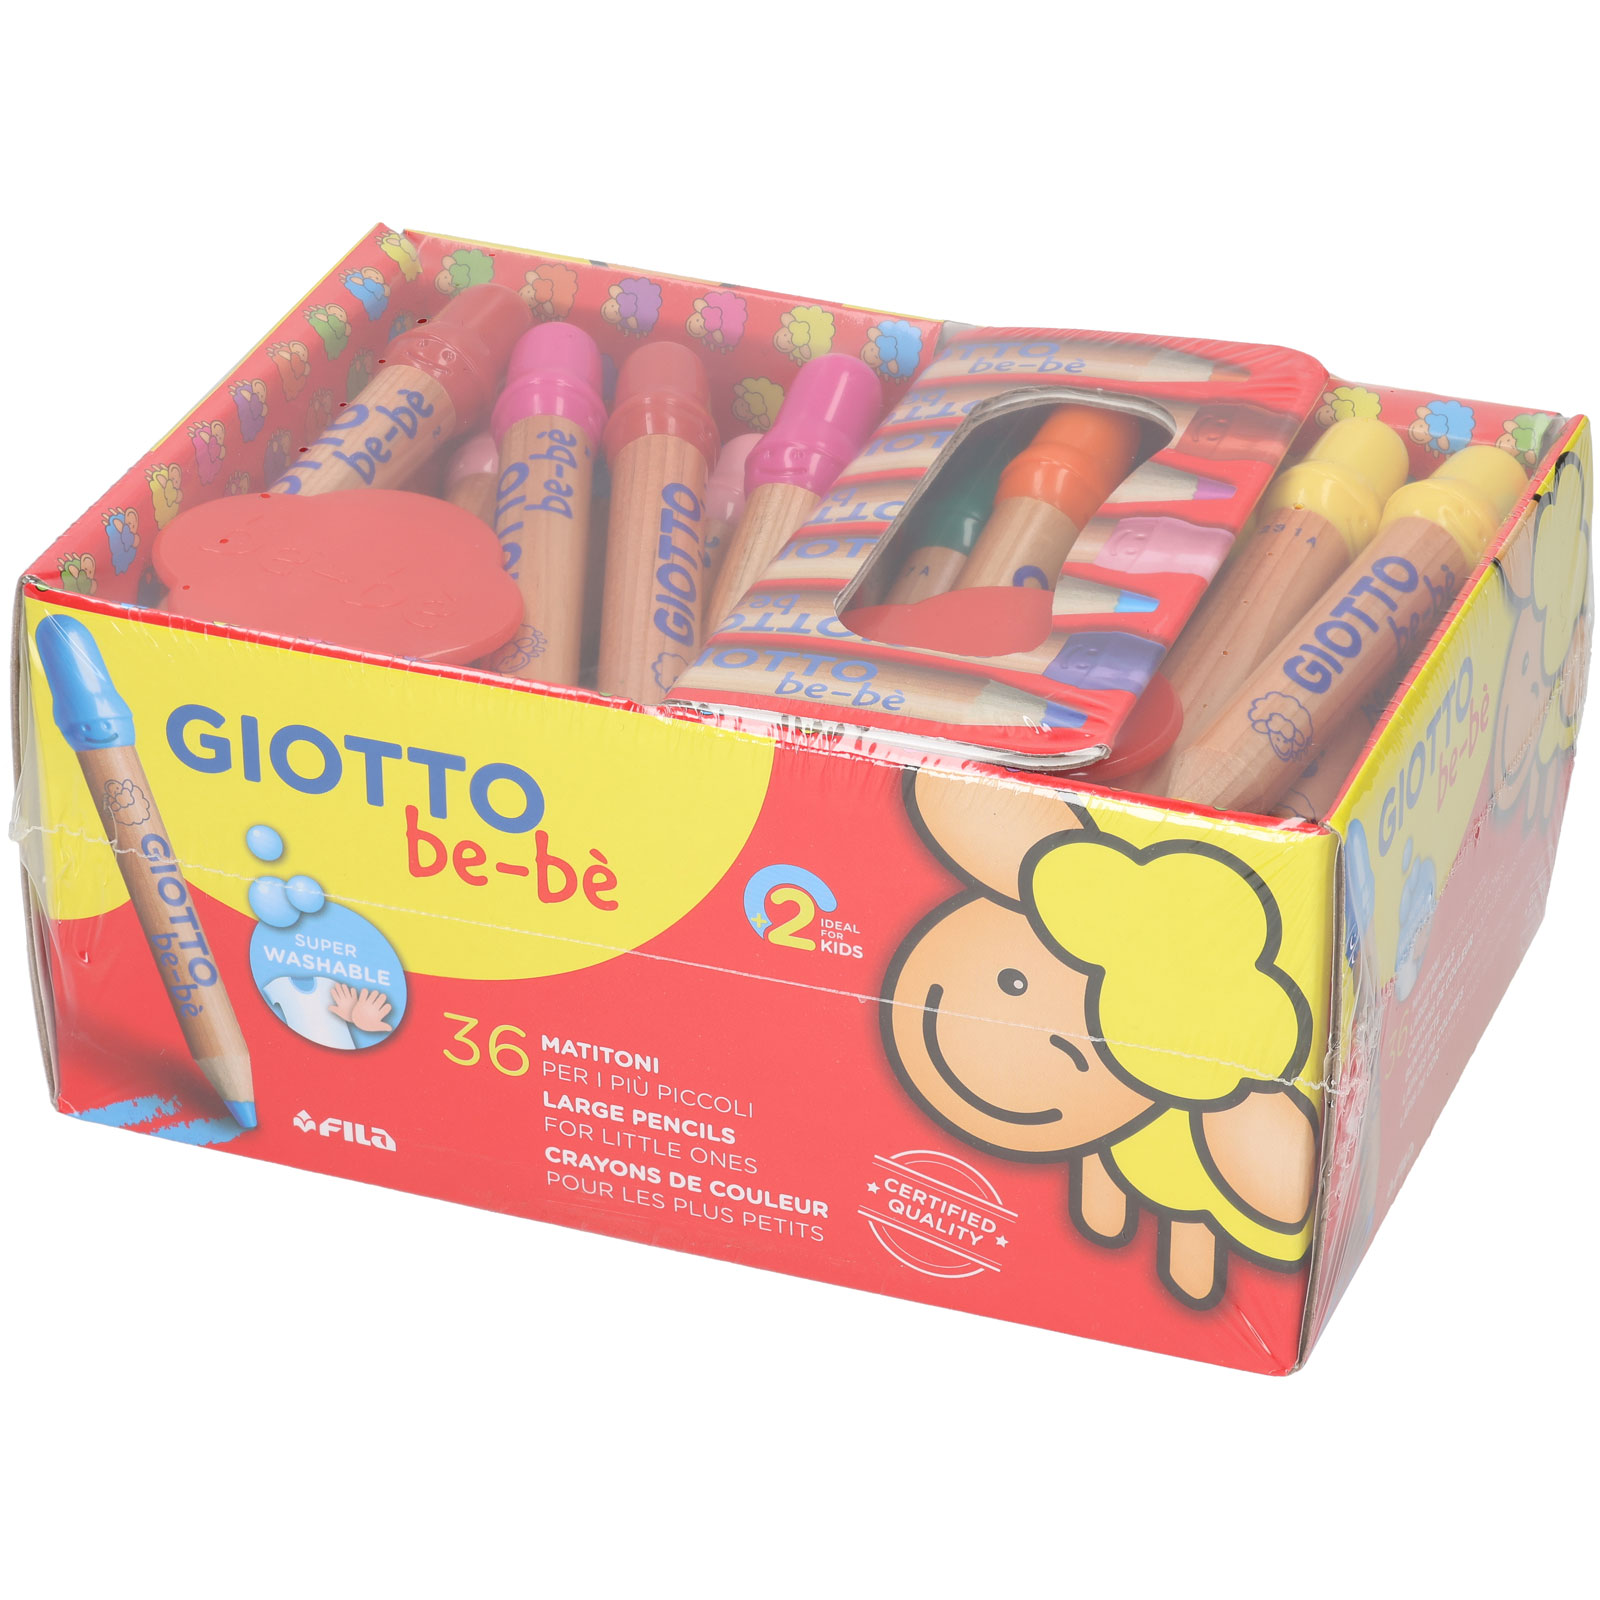 Giotto Be-bè Super Large Pencil Set of 10